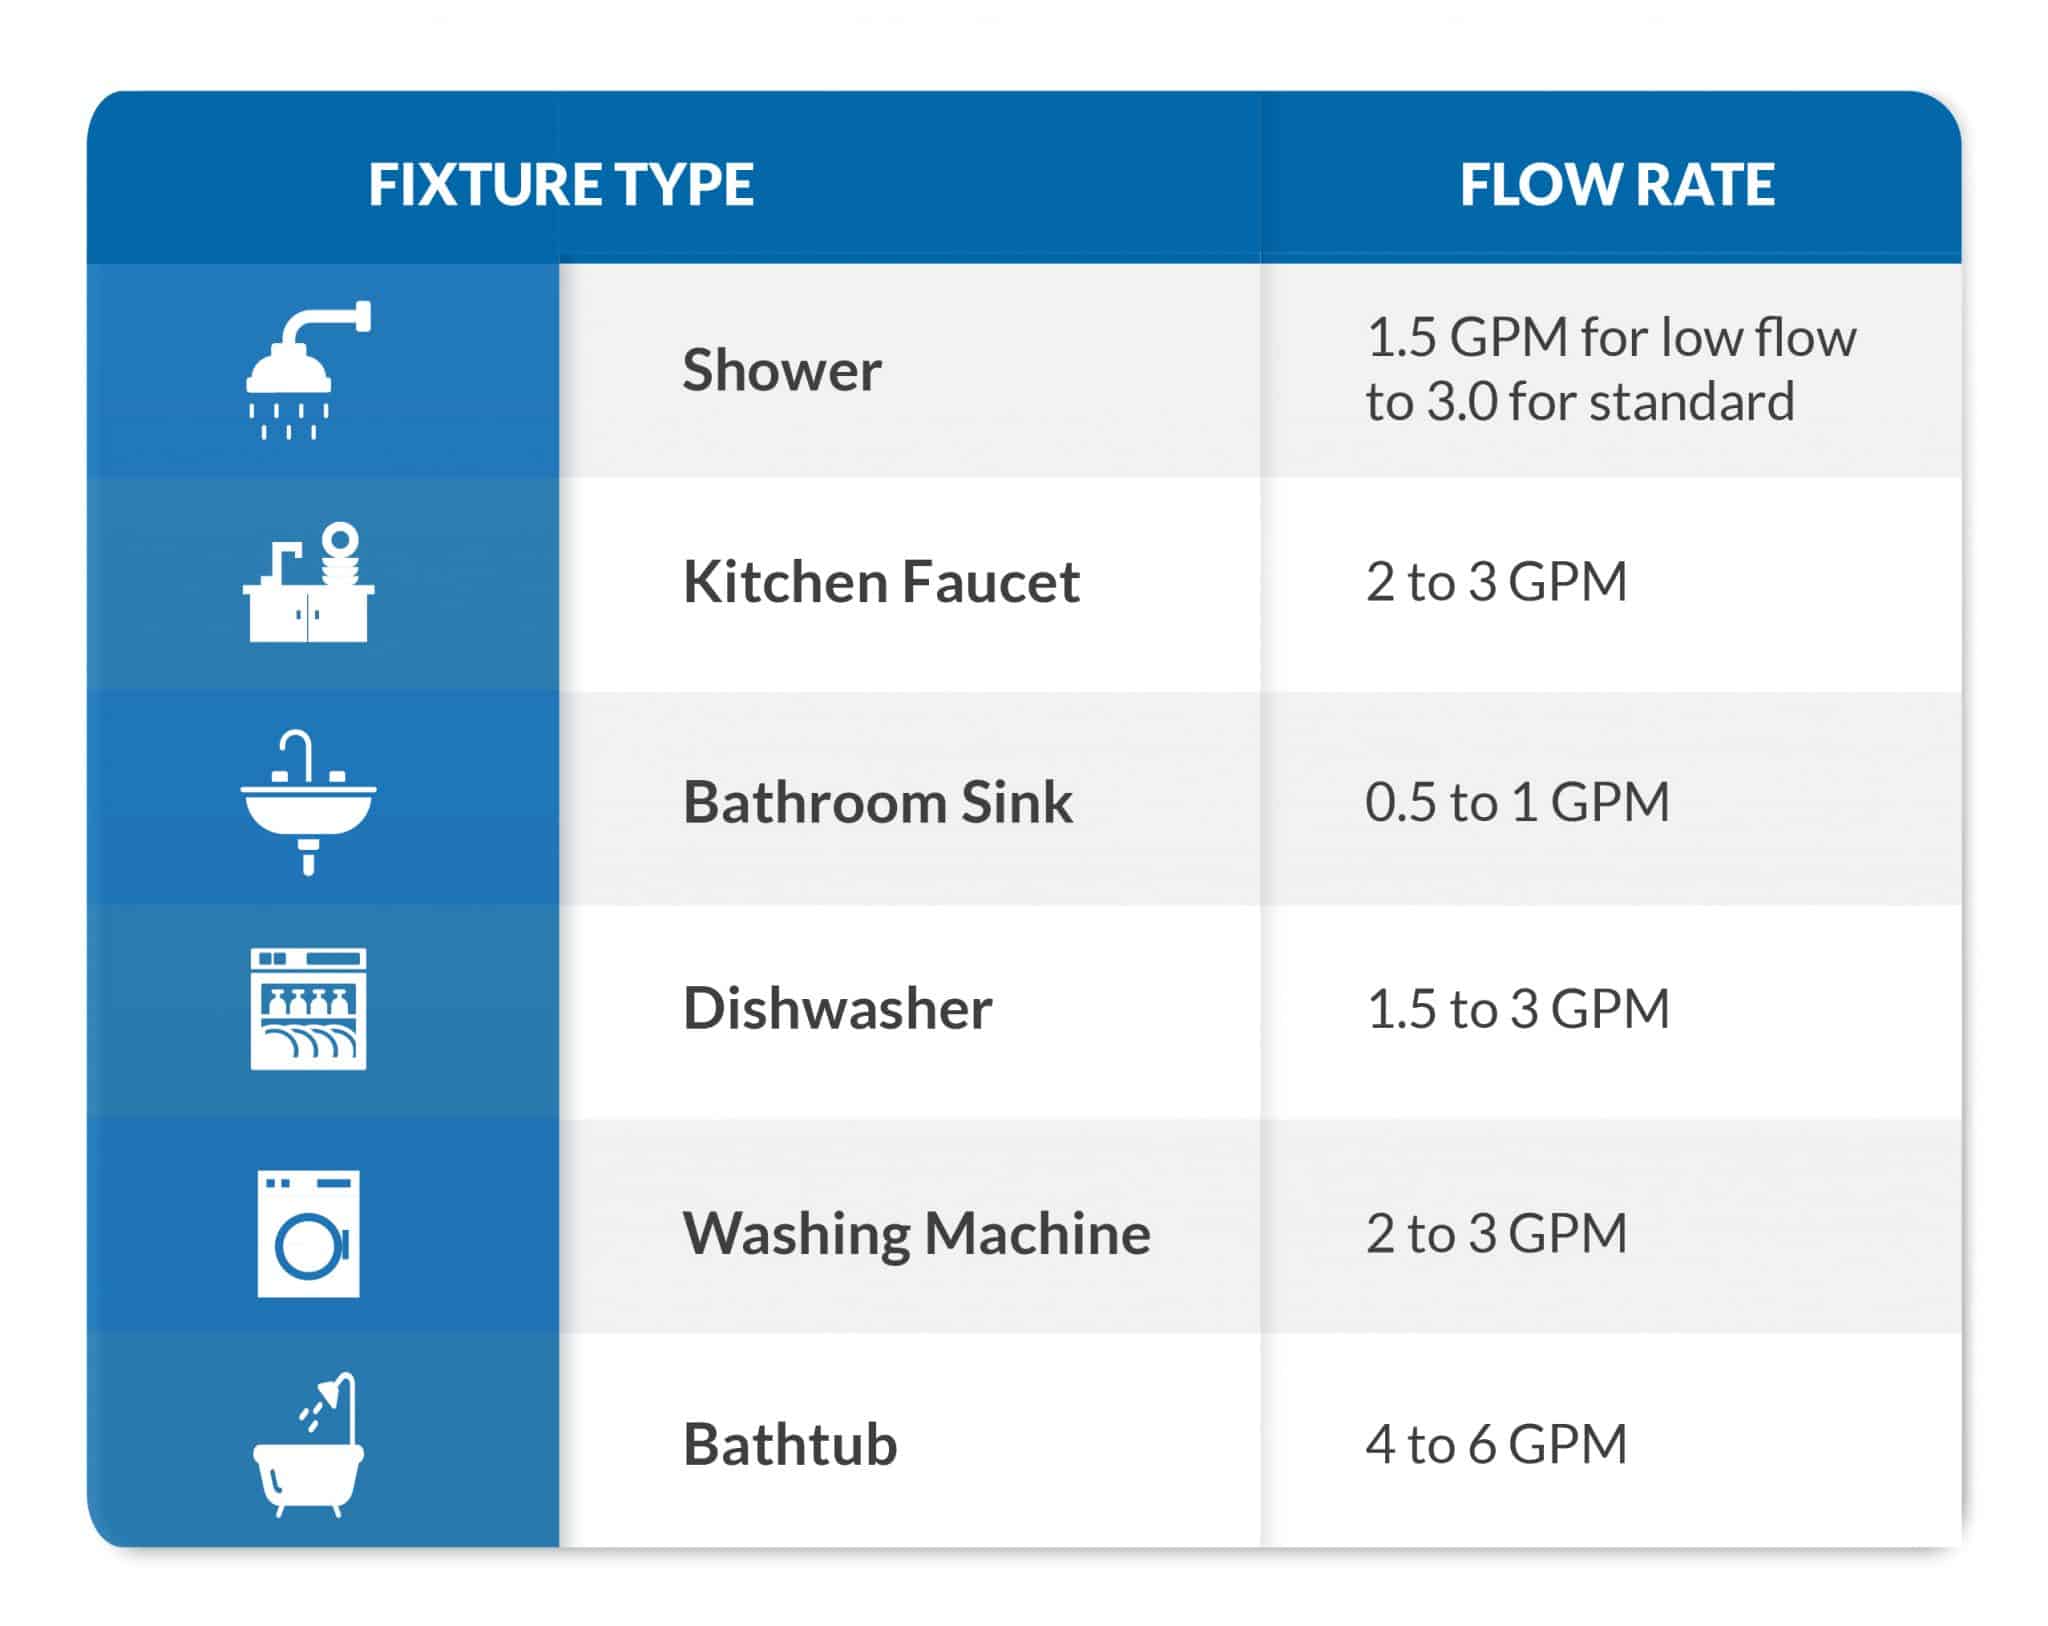 How To Size A Tankless Water Heater: Use Our Sizing Calculator